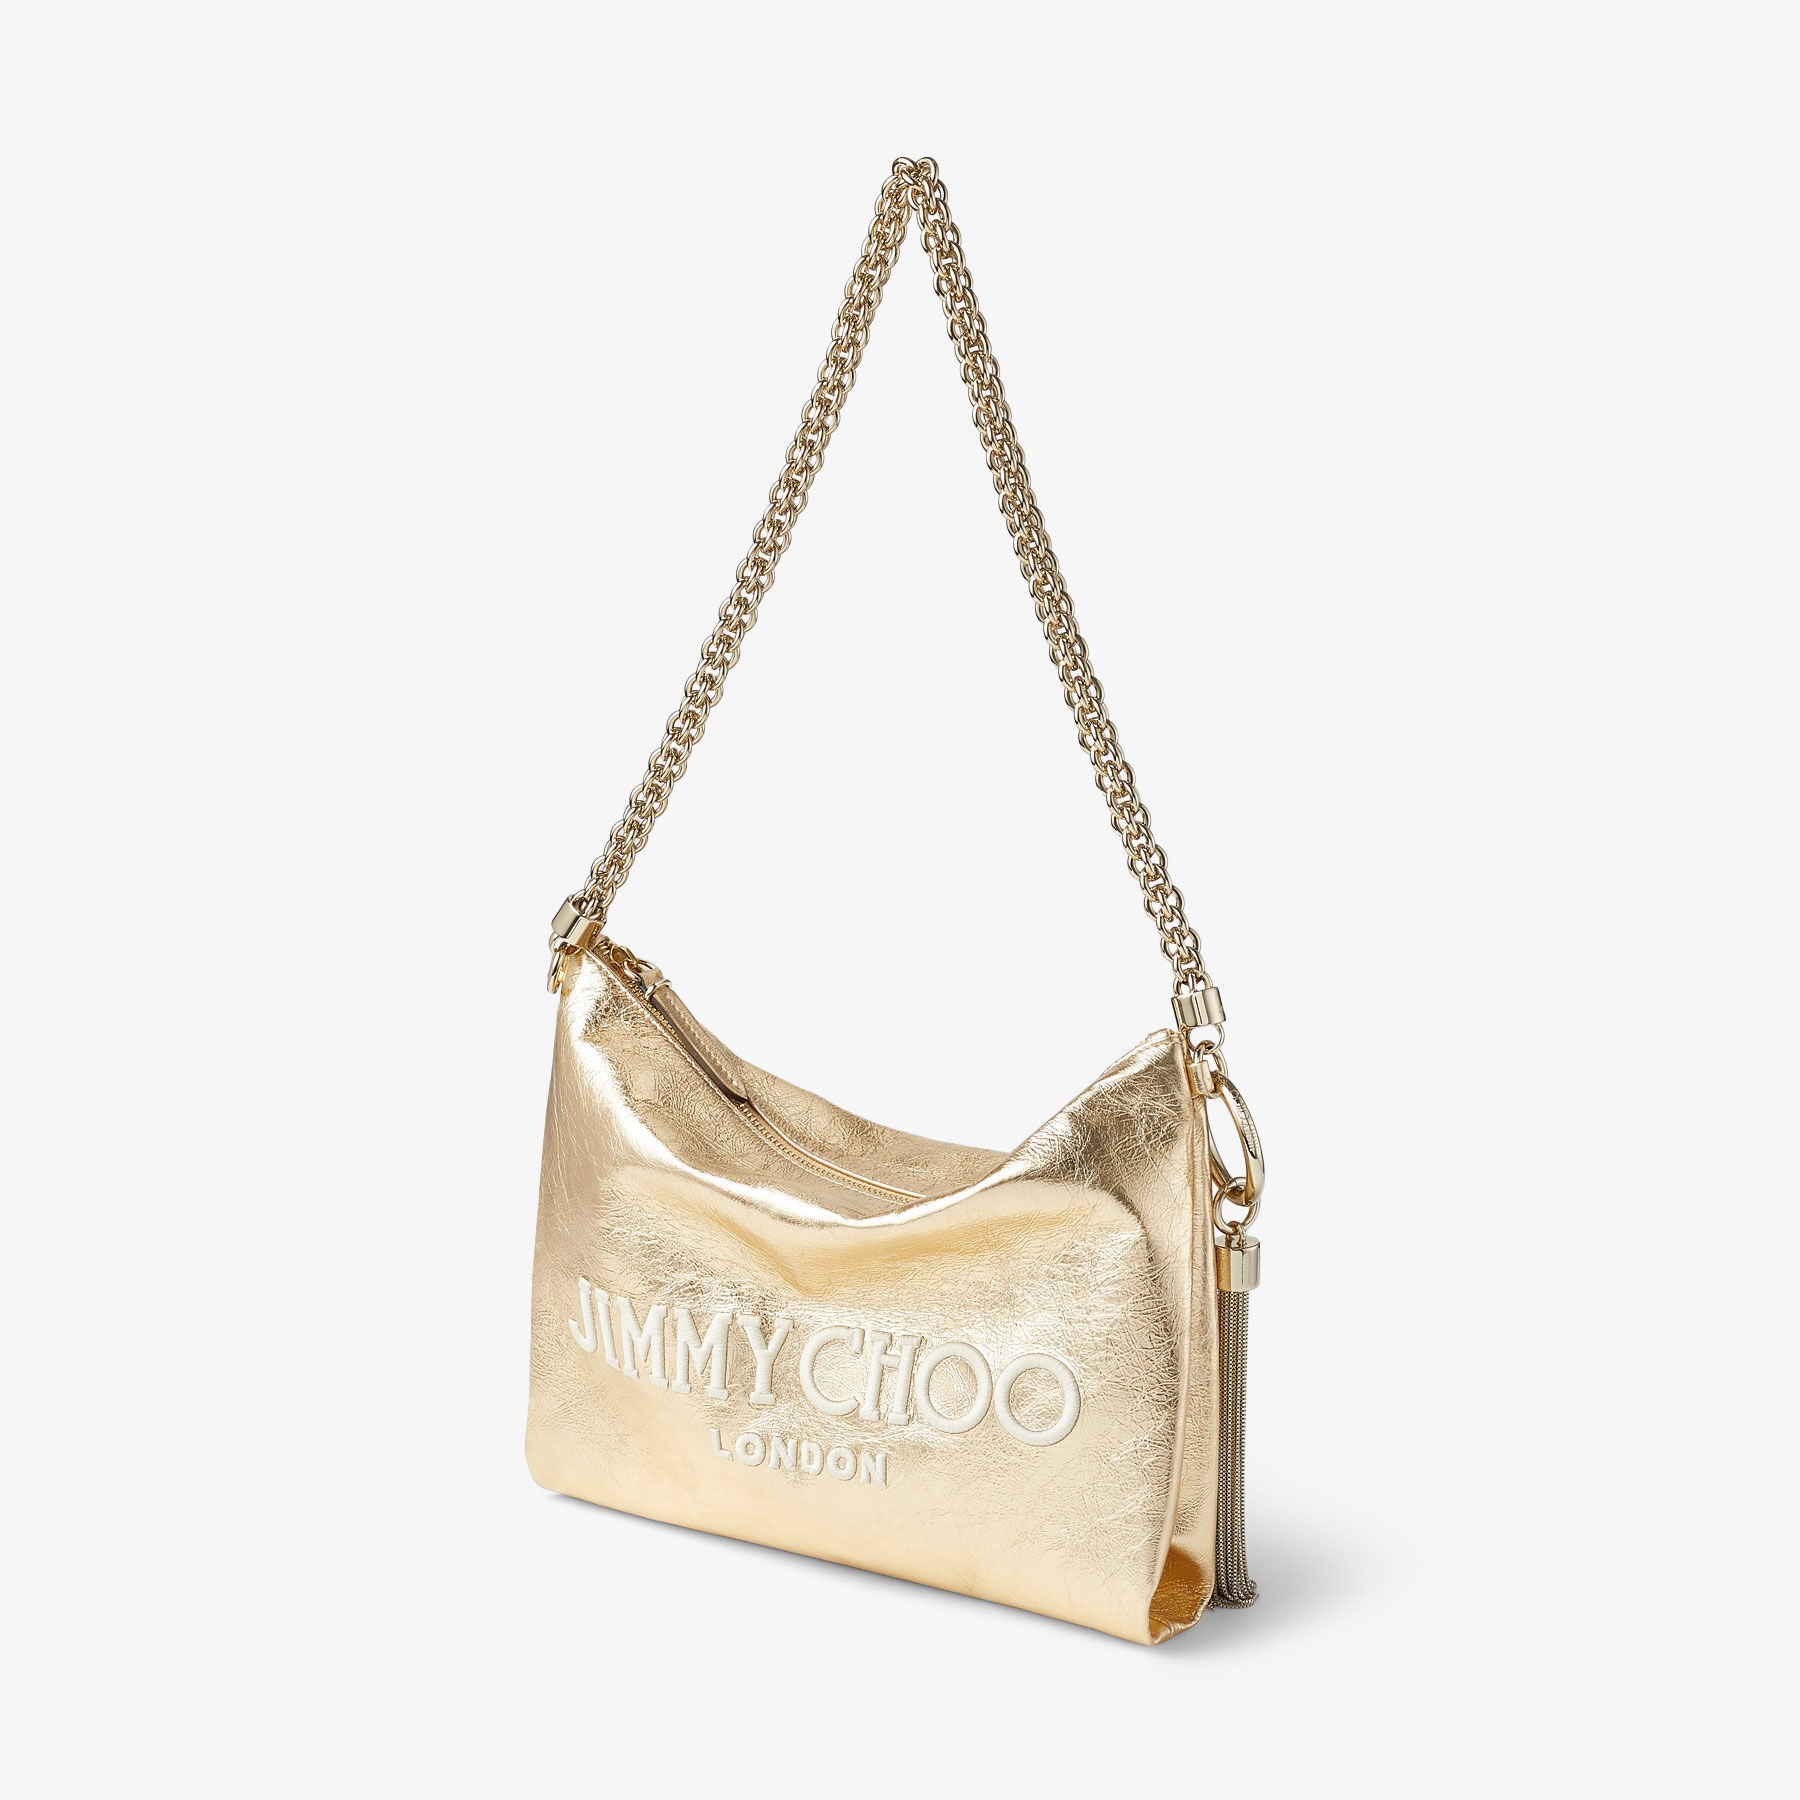 Callie Shoulder
Gold Metallic Nappa Shoulder Bag with Jimmy Choo Embroidery - 2